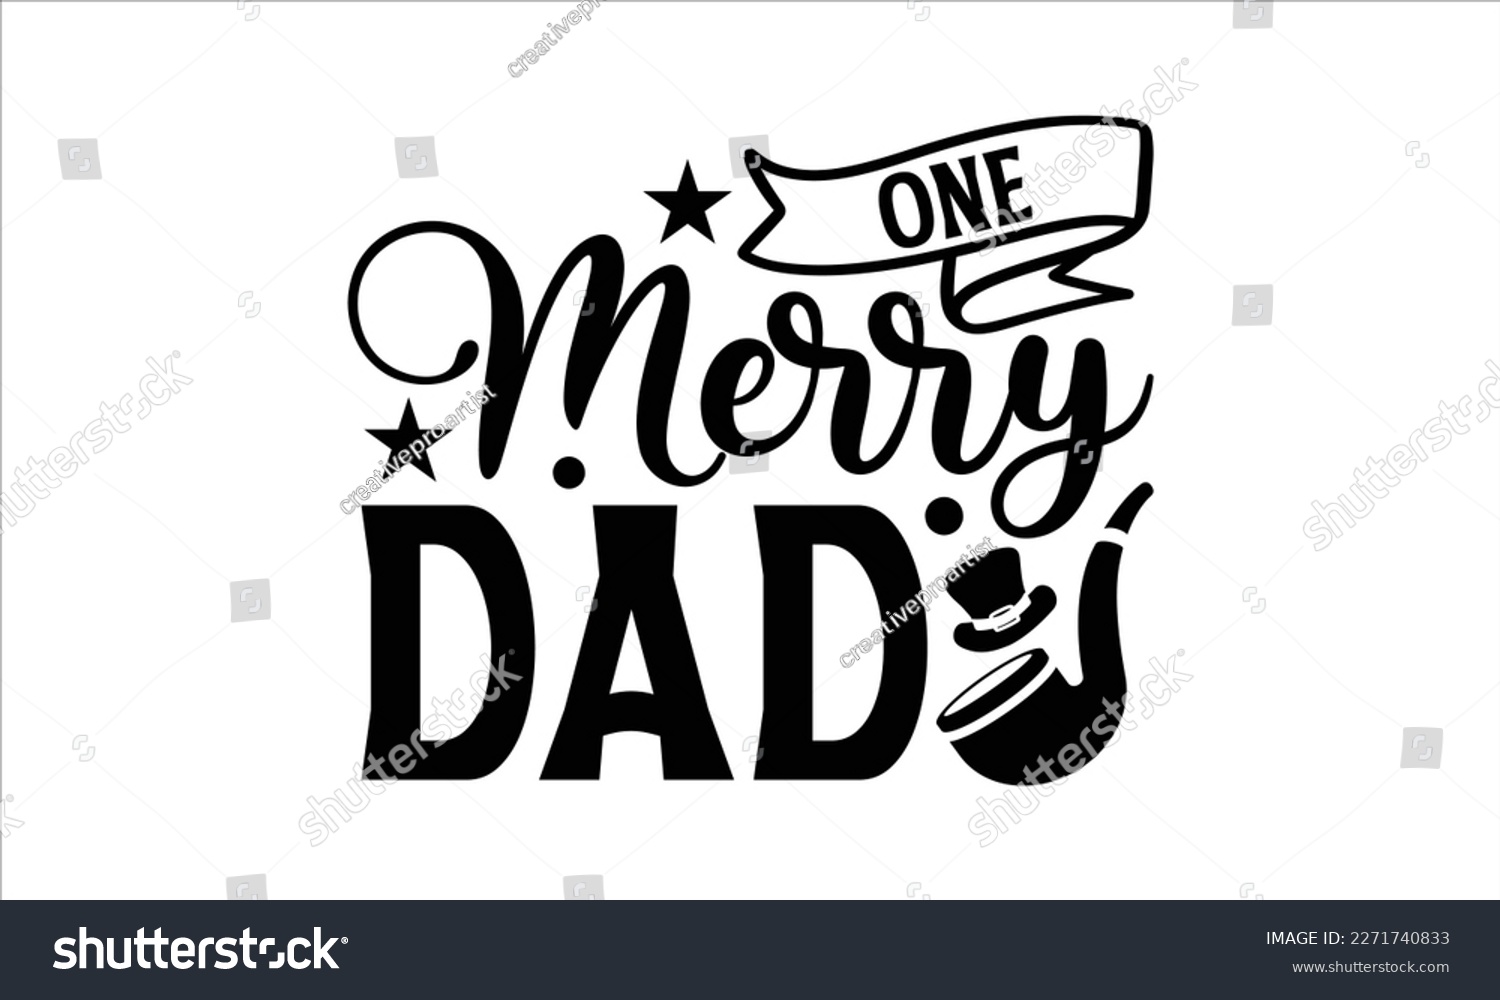 SVG of One merry dad- Father's Day svg design, Hand drawn lettering phrase isolated on white background, Illustration for prints on t-shirts and bags, posters, cards eps 10. svg